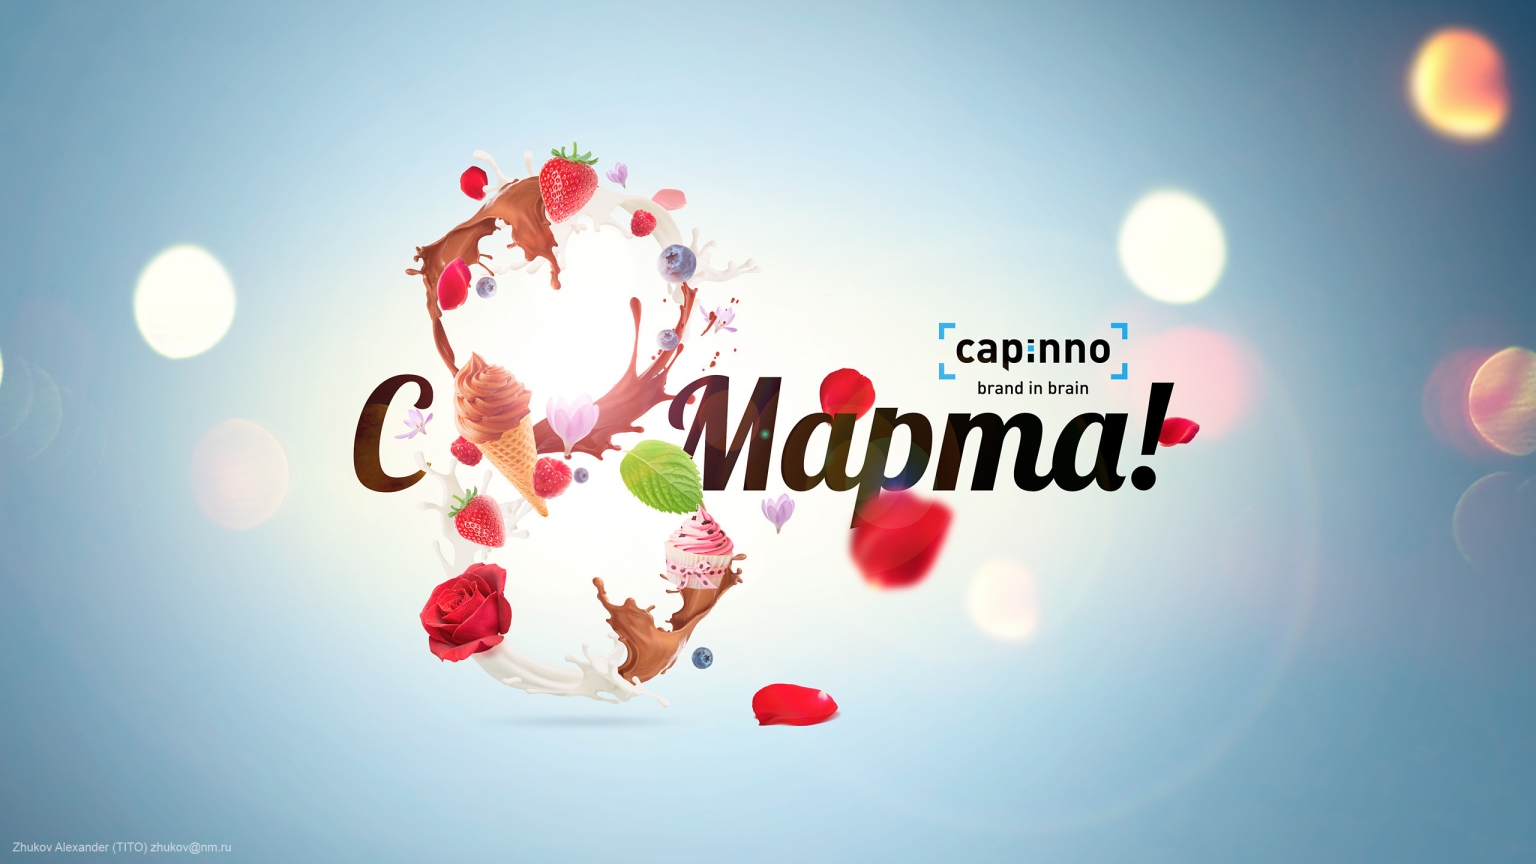 8 March Capinno for 1536 x 864 HDTV resolution